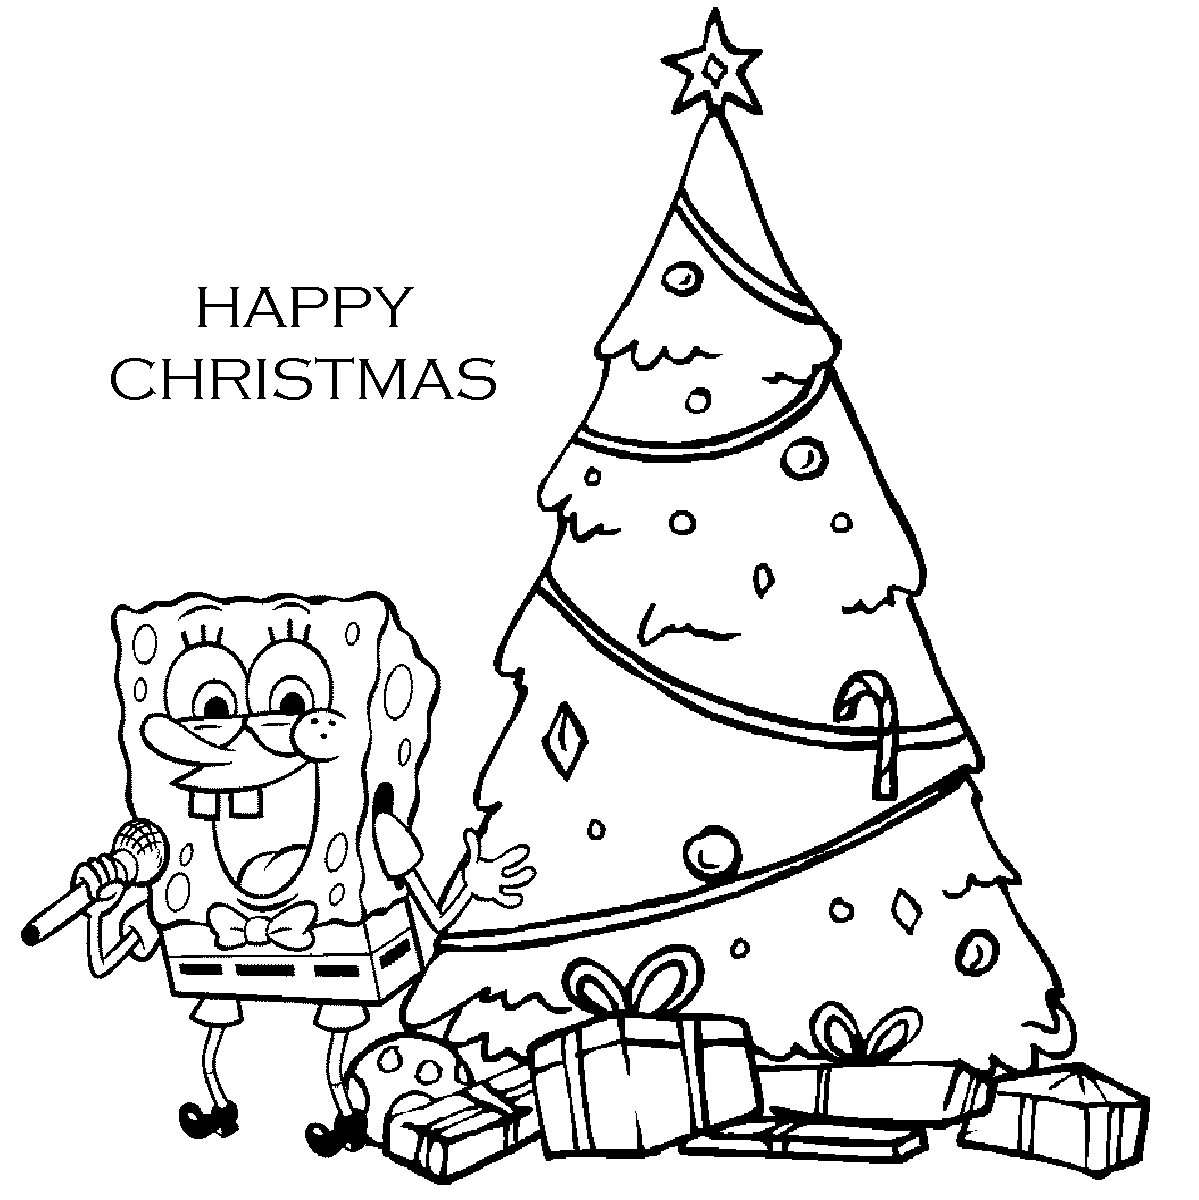 Coloring page: Christmas Tree (Objects) #167452 - Free Printable Coloring Pages